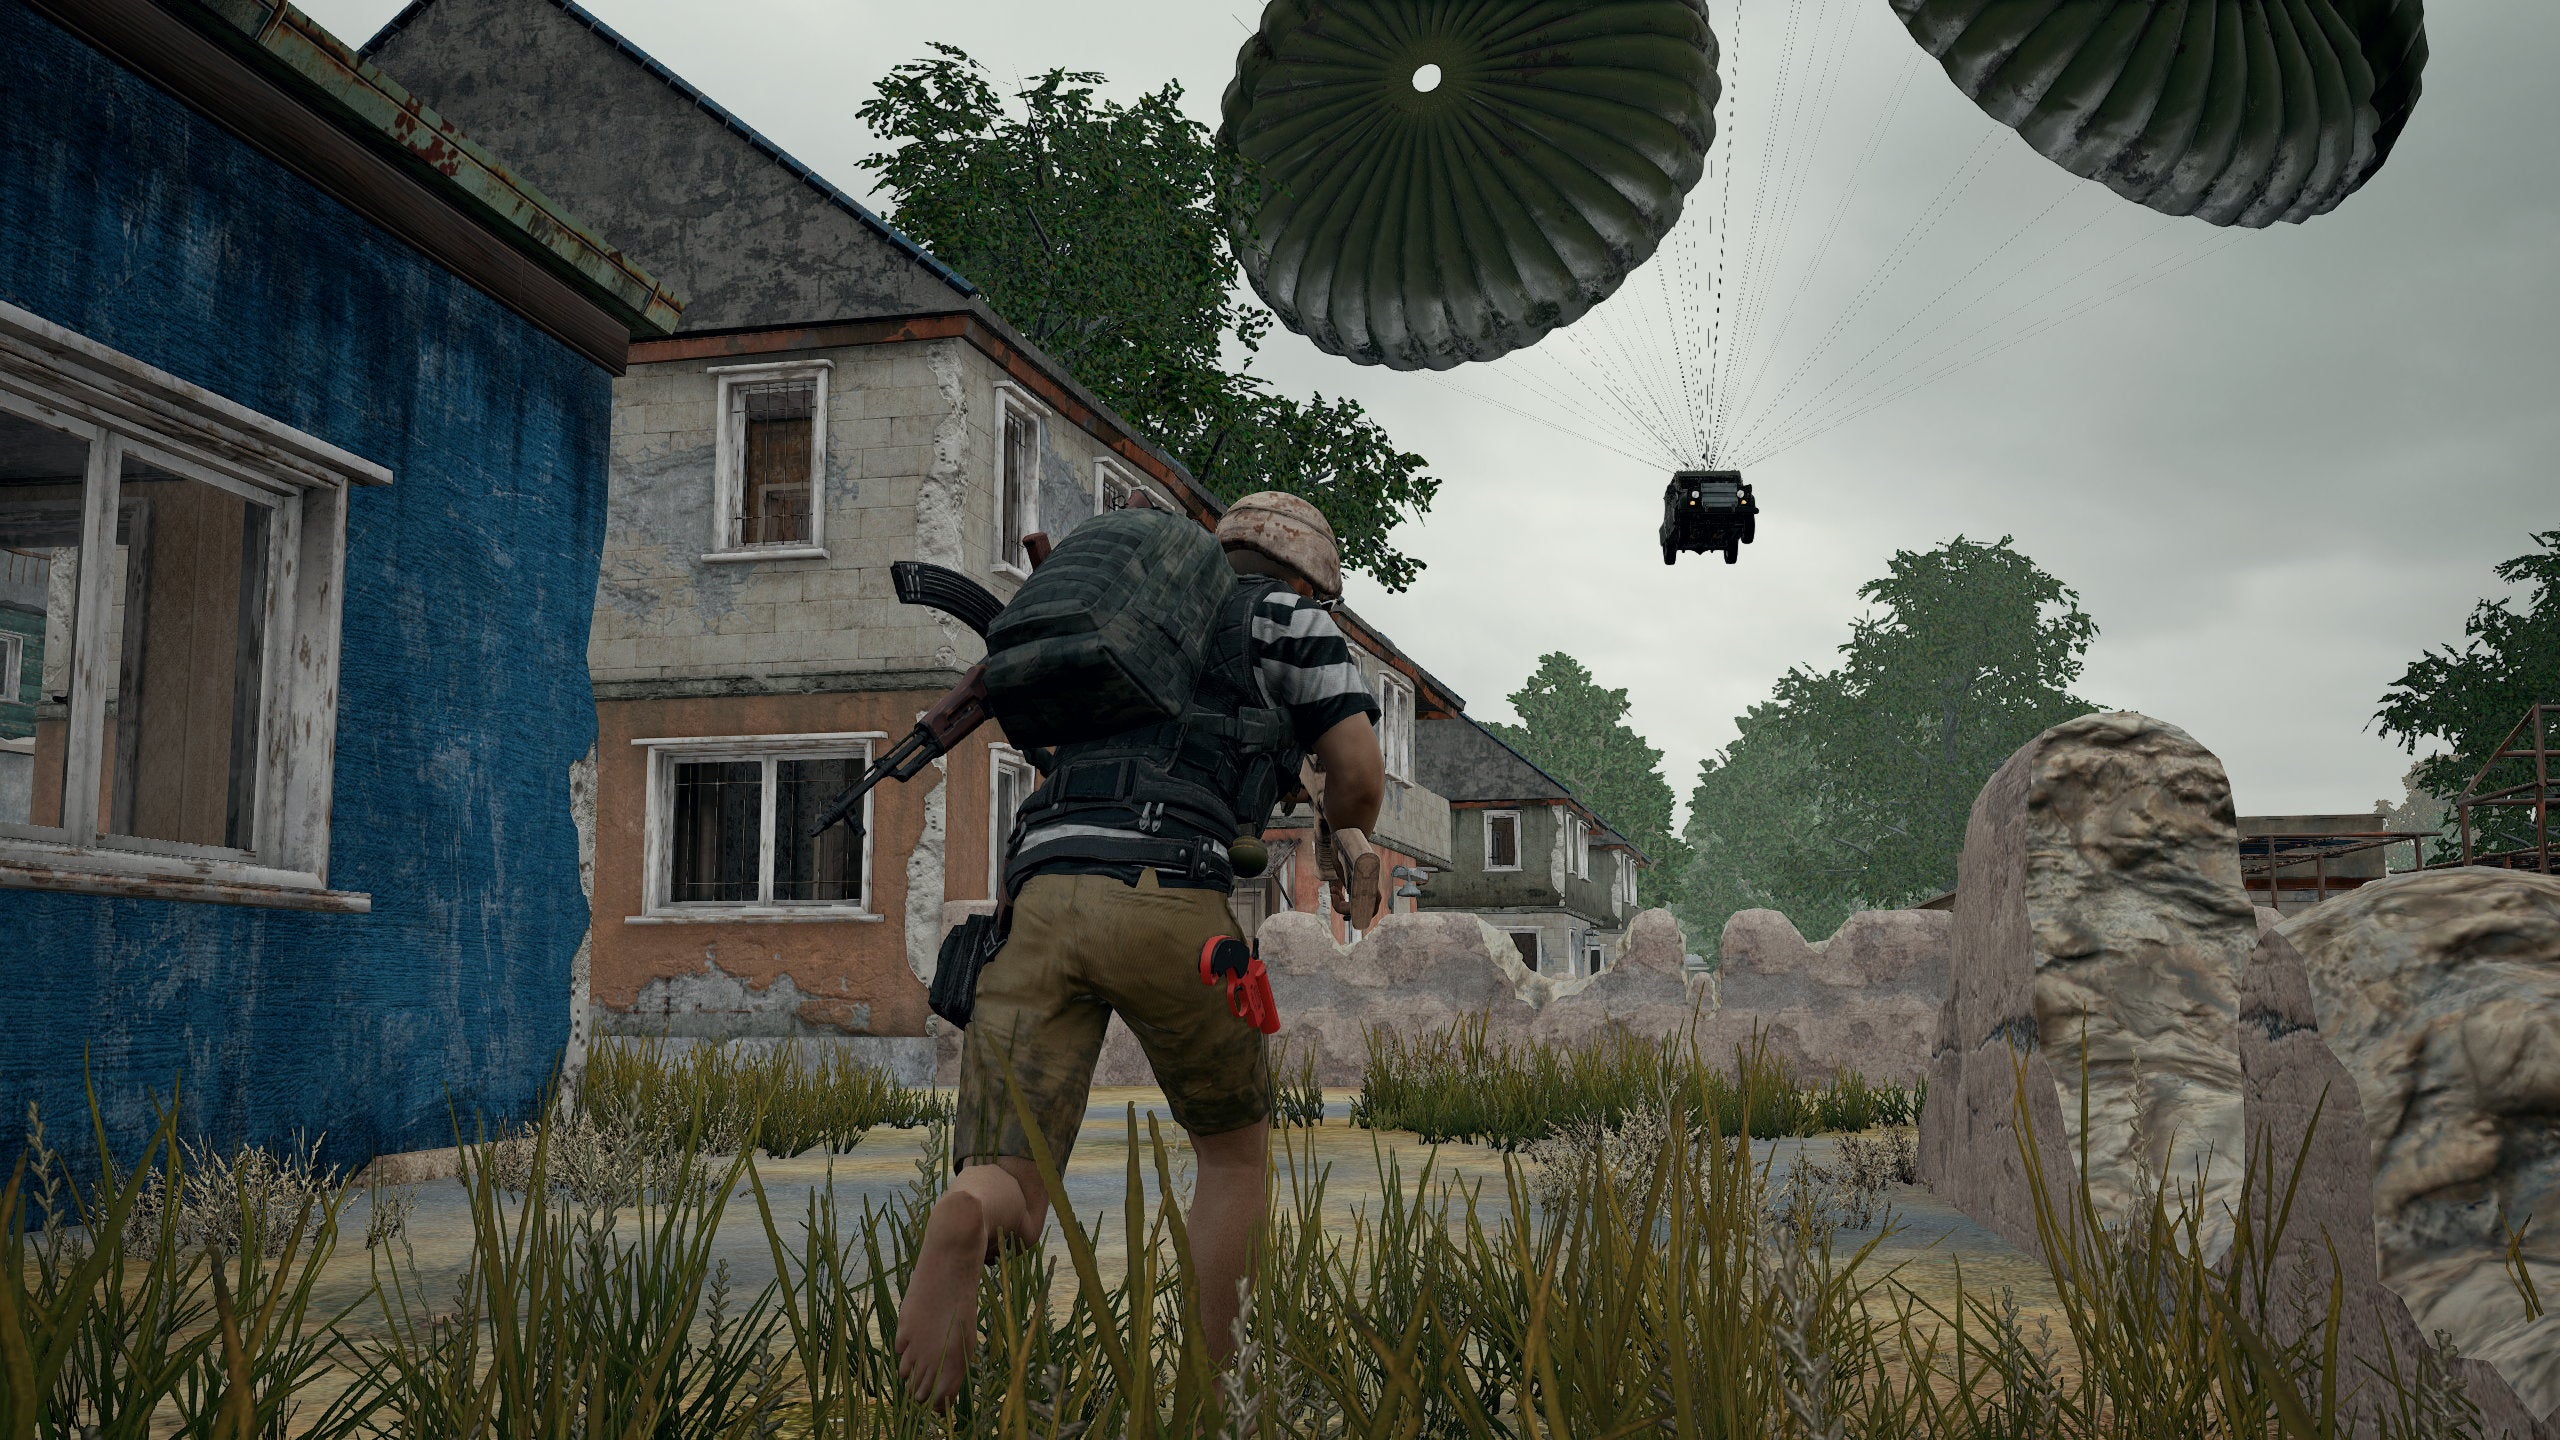 An armoured jeep dropping in a Playerunknown's Battlegrounds screenshot.